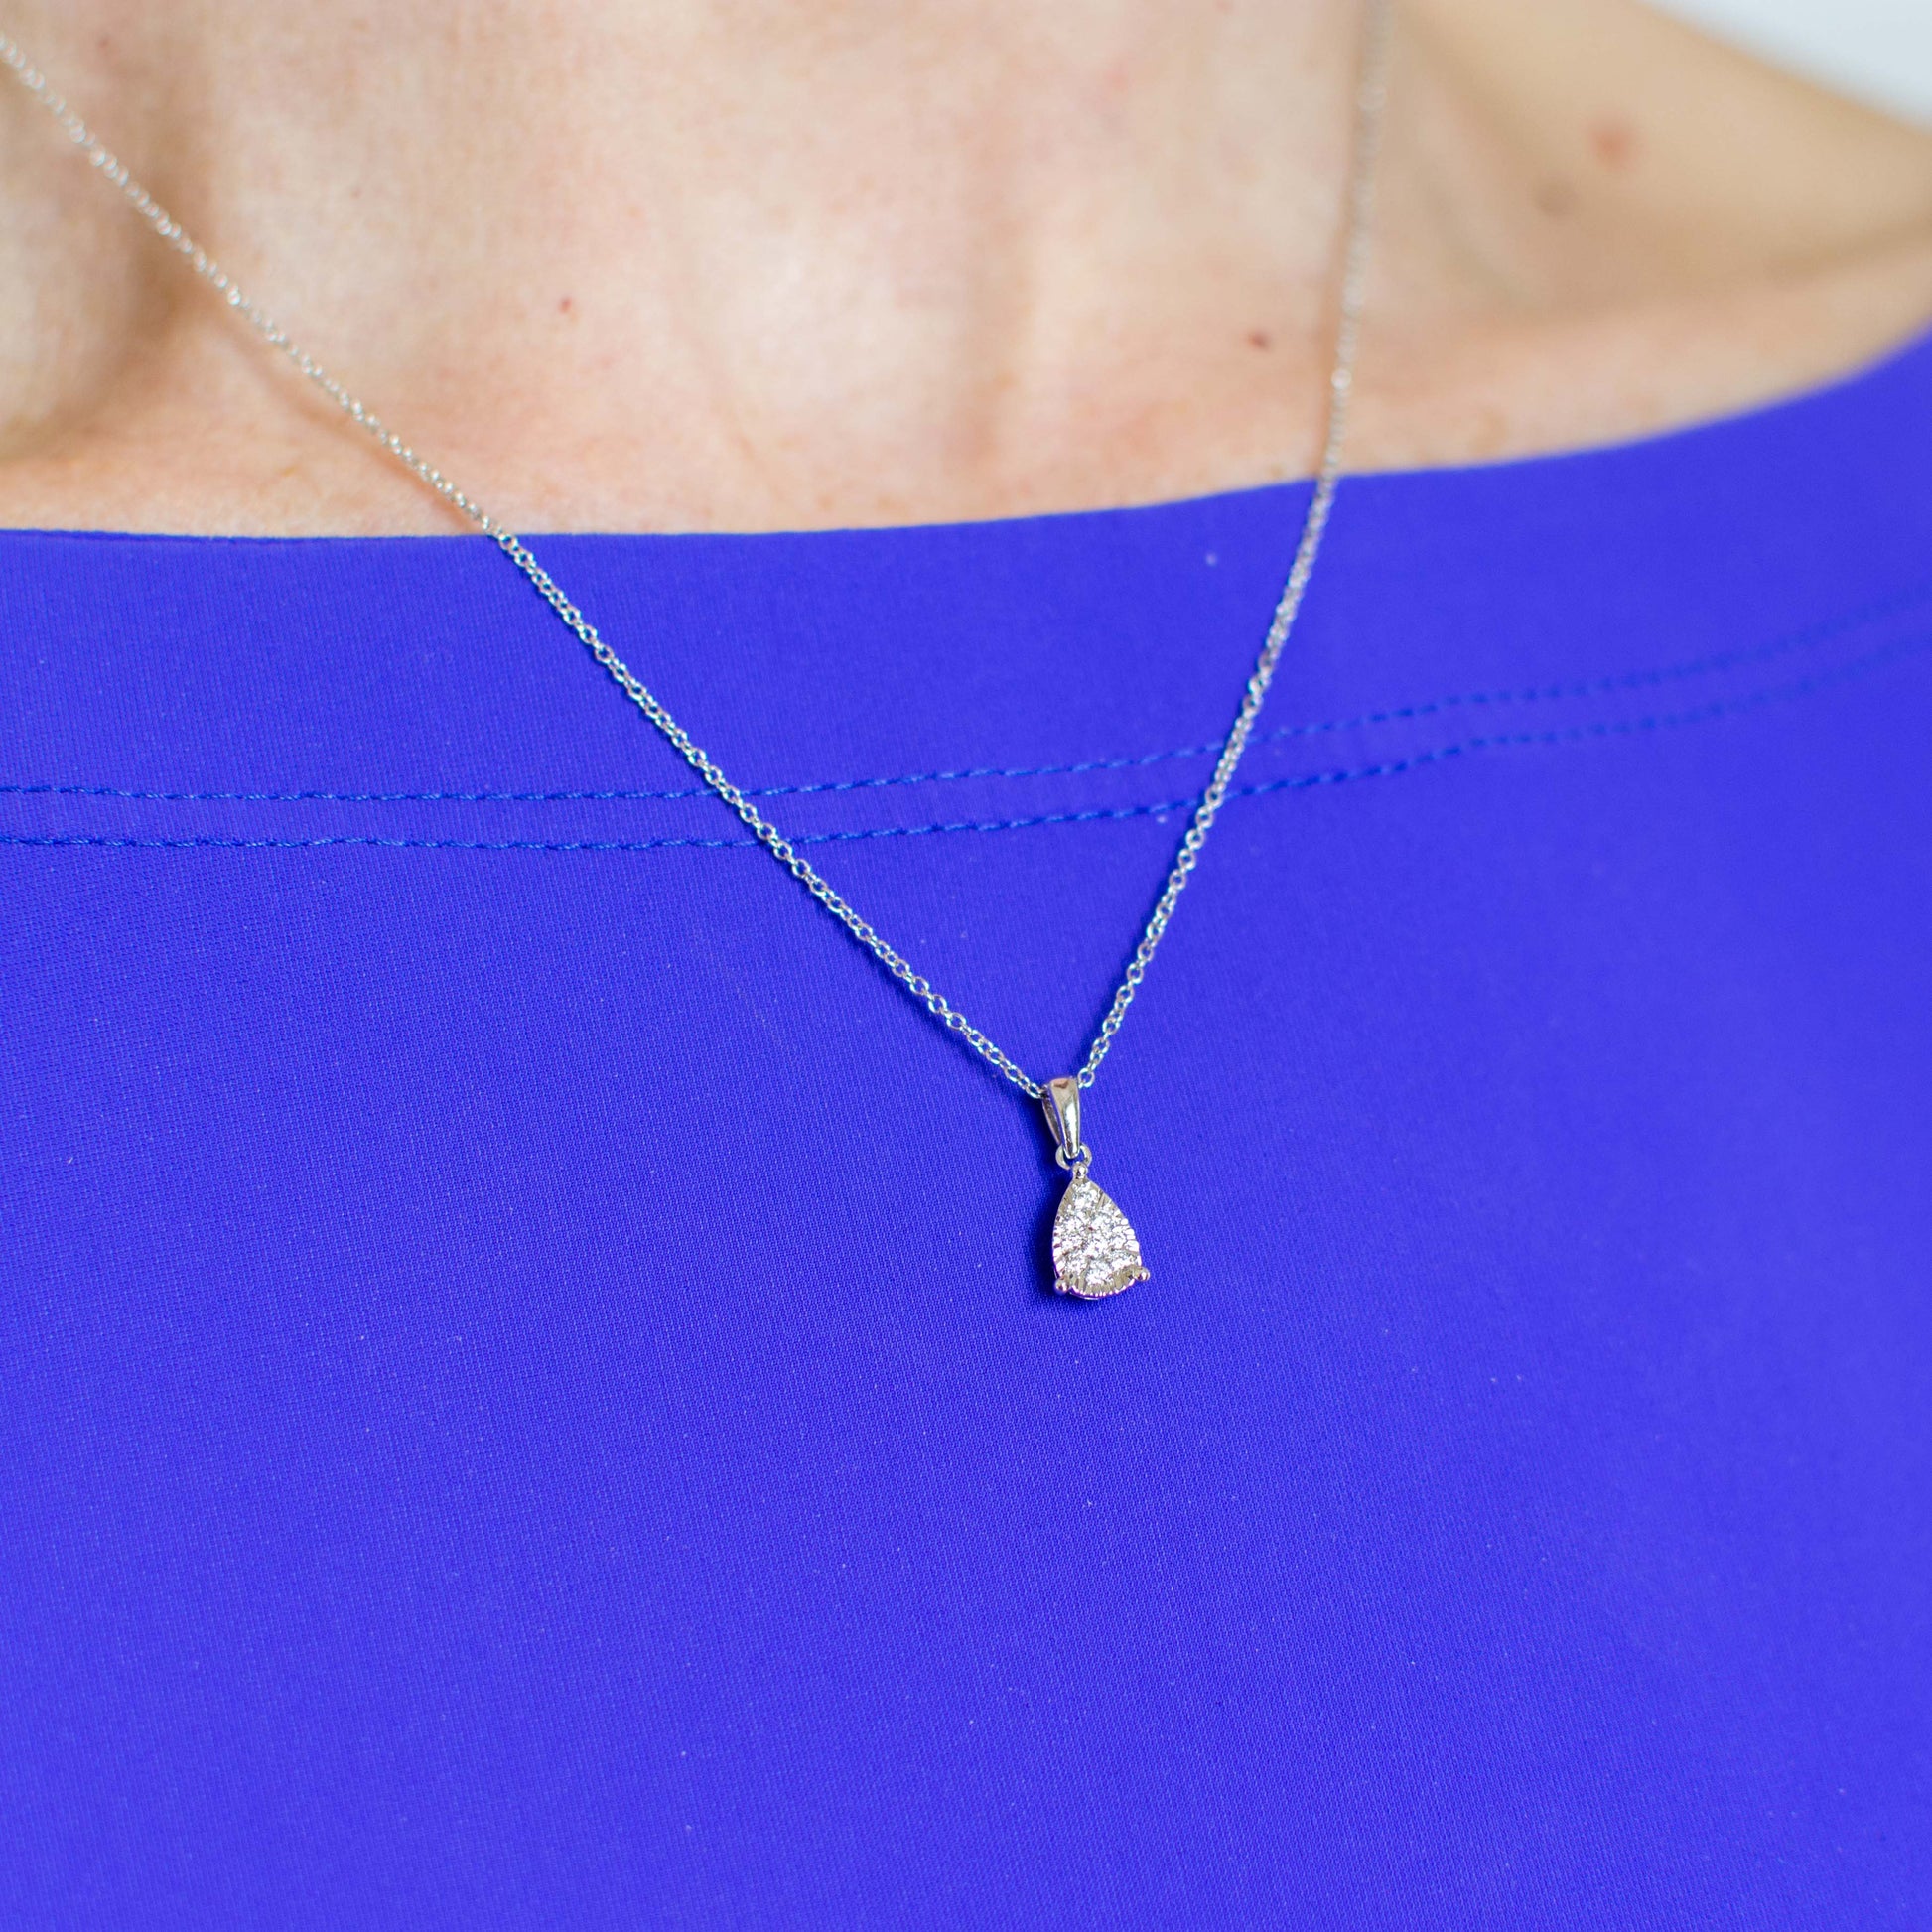 This beautiful necklace features a pear/teardrop shaped pendant set with nine round brilliant cut diamonds . 9ct white gold.   16-18" adjustable 9ct white gold fine trace chain with bolt ring clasp.